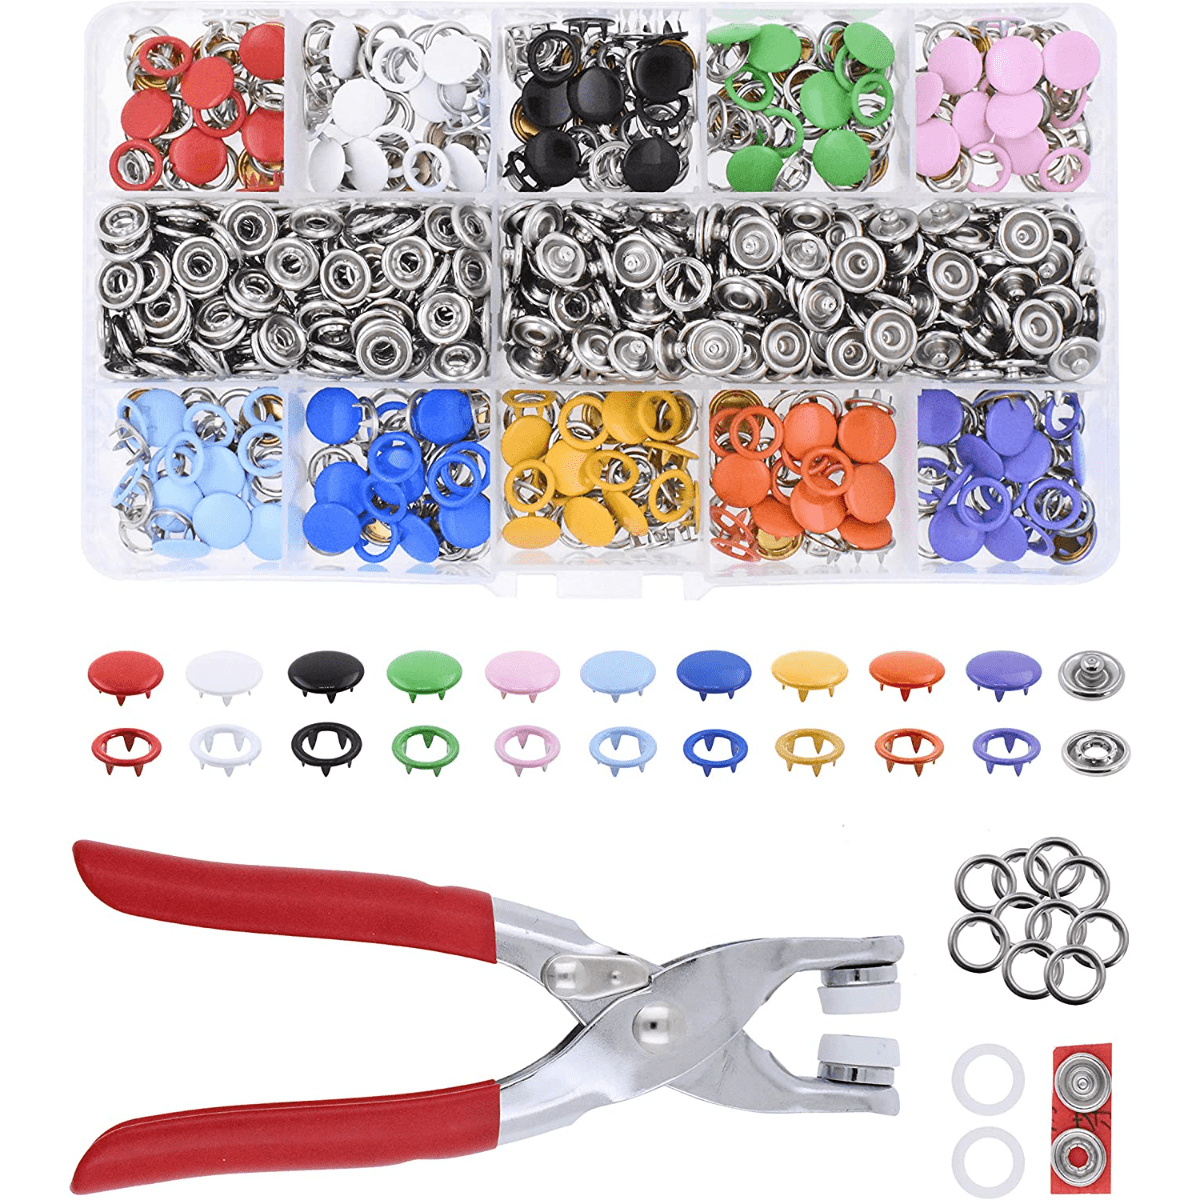 100pcs/set Zinc Alloy Snap Fasteners Kit Tool, Metal Snap Buttons Rings  With Fastener Pliers Press Tool Kit For Sewing